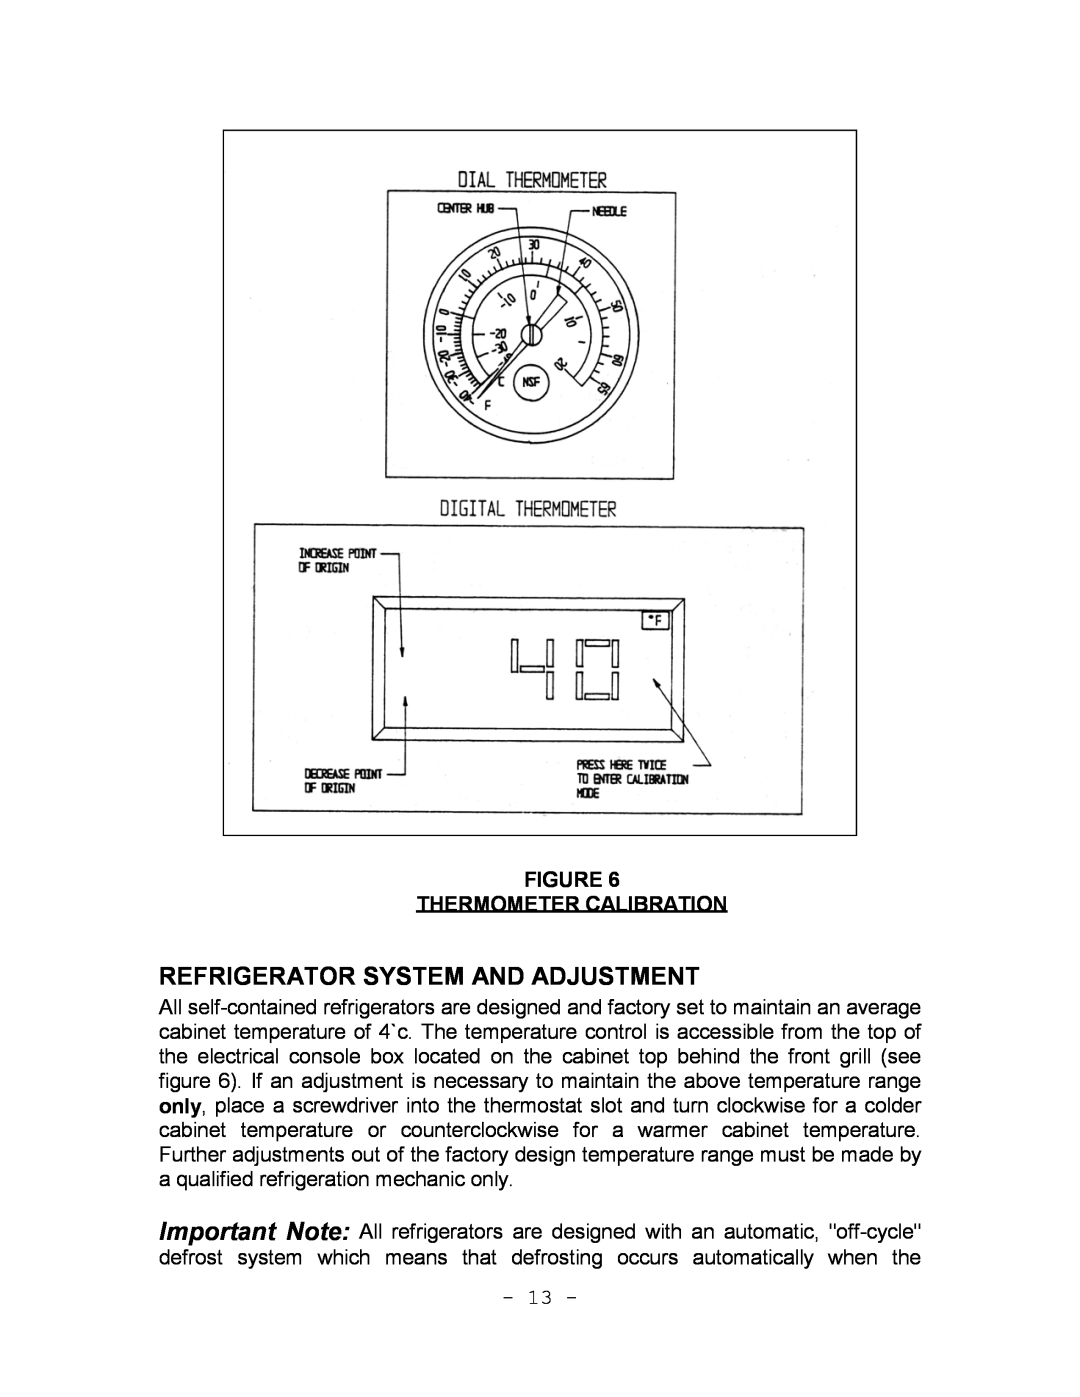 Continental Refrigerator Refrigerators and Freezers Refrigerator System And Adjustment, Figure Thermometer Calibration 